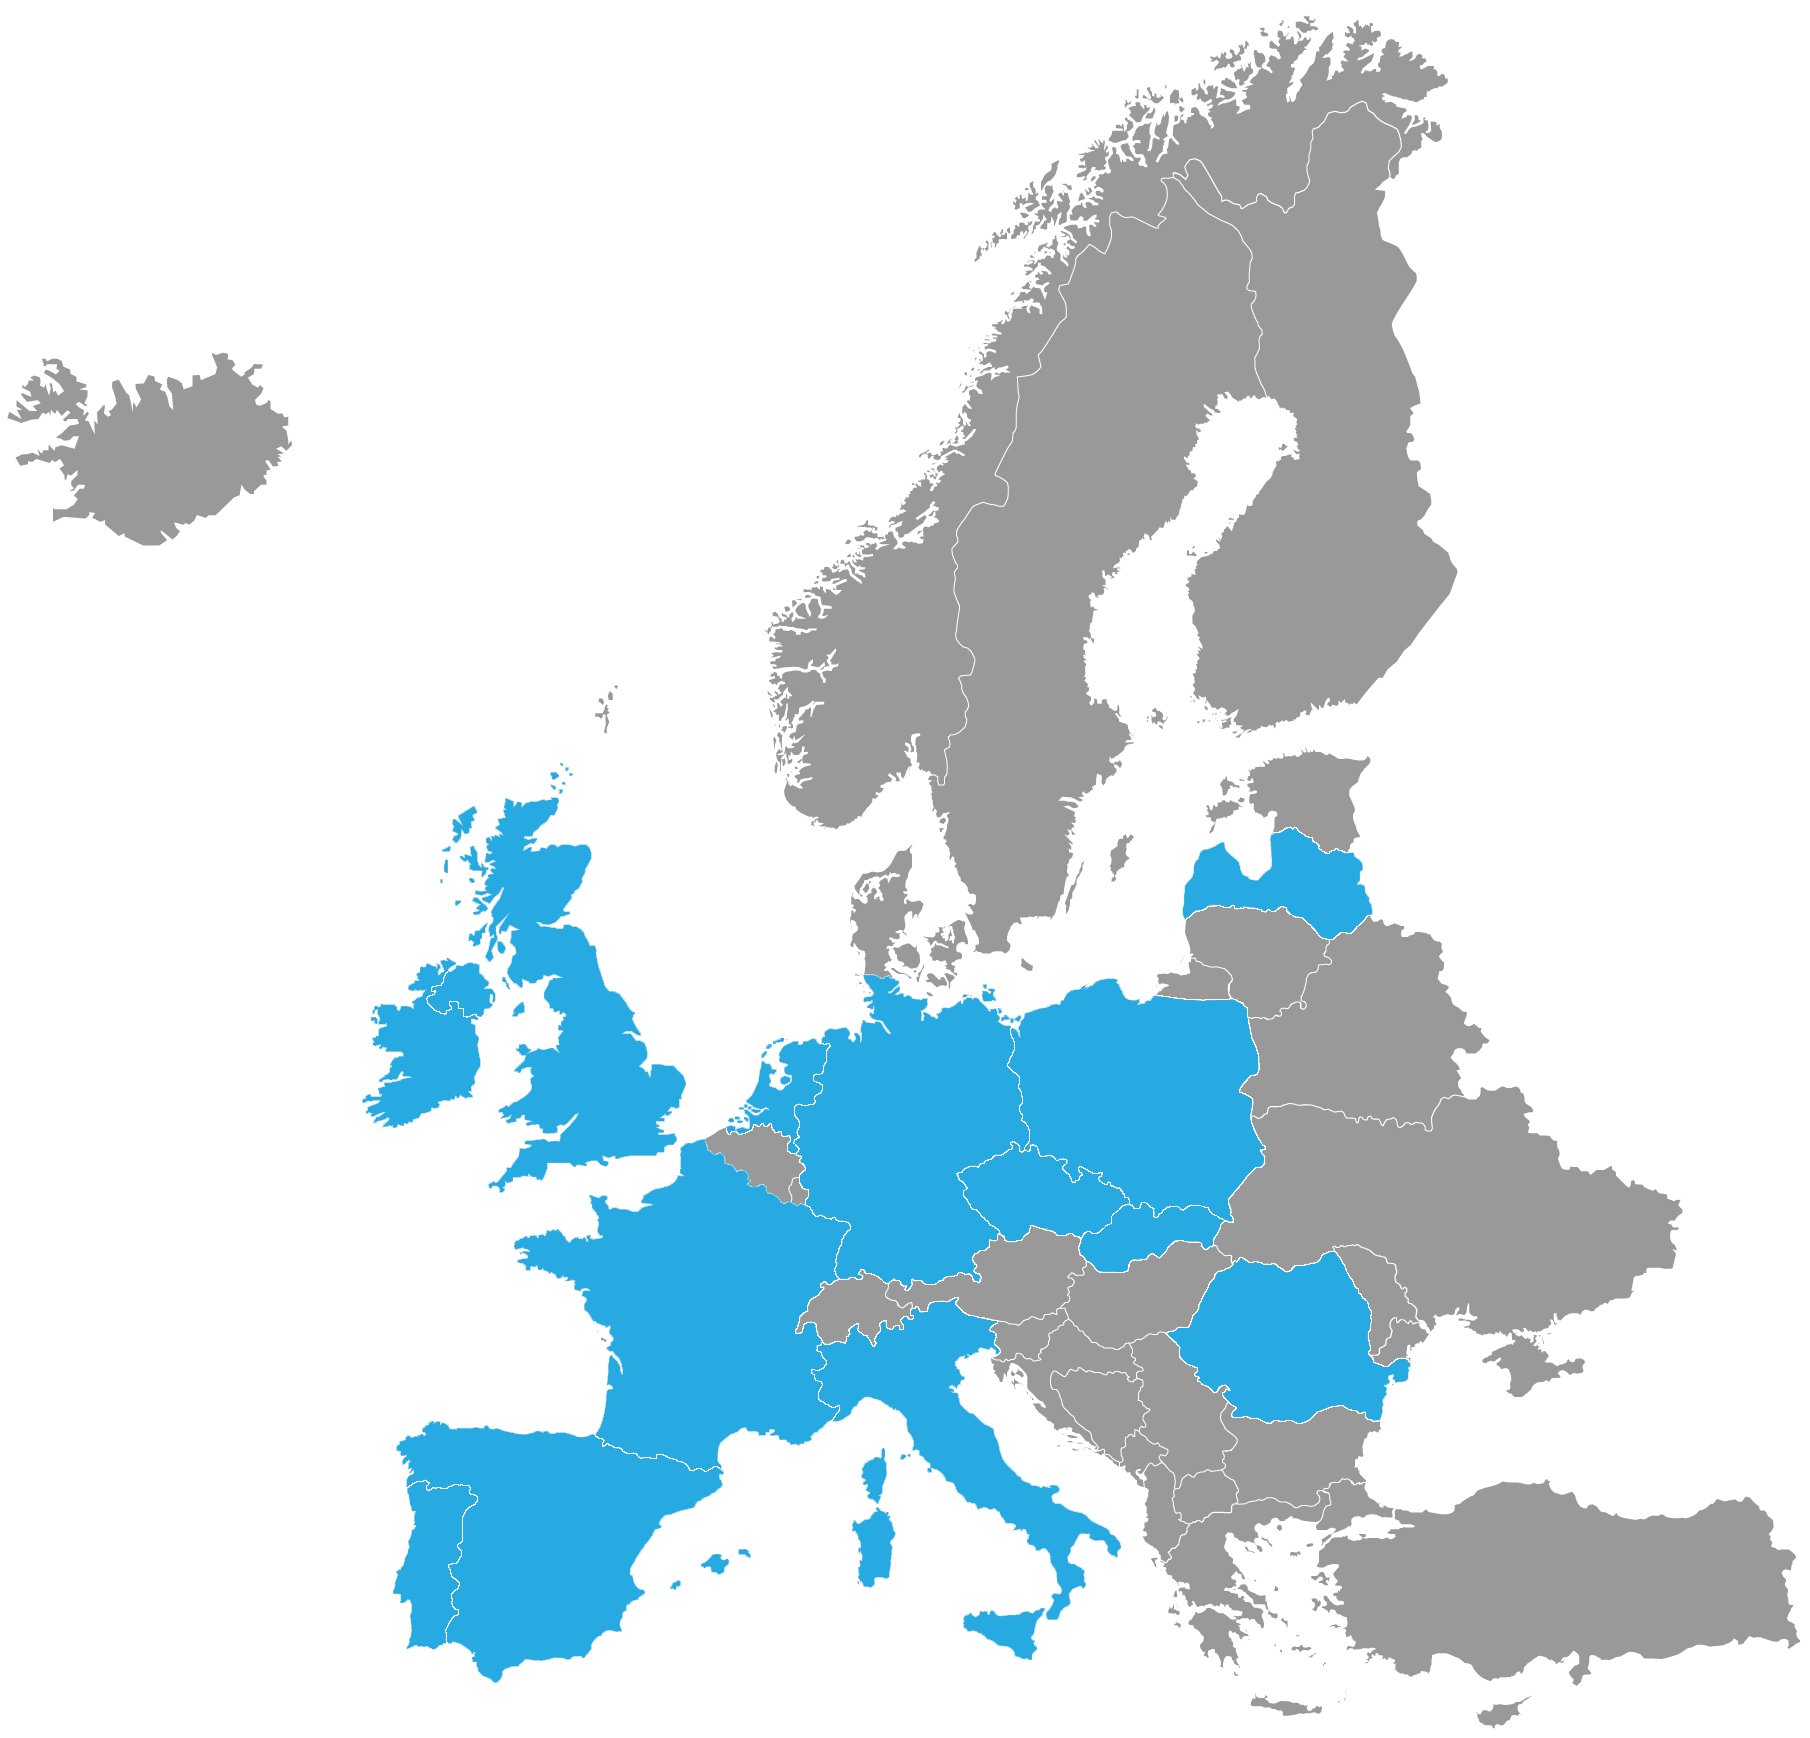 Map of Europe showing countries 4tonic has vehicle data for